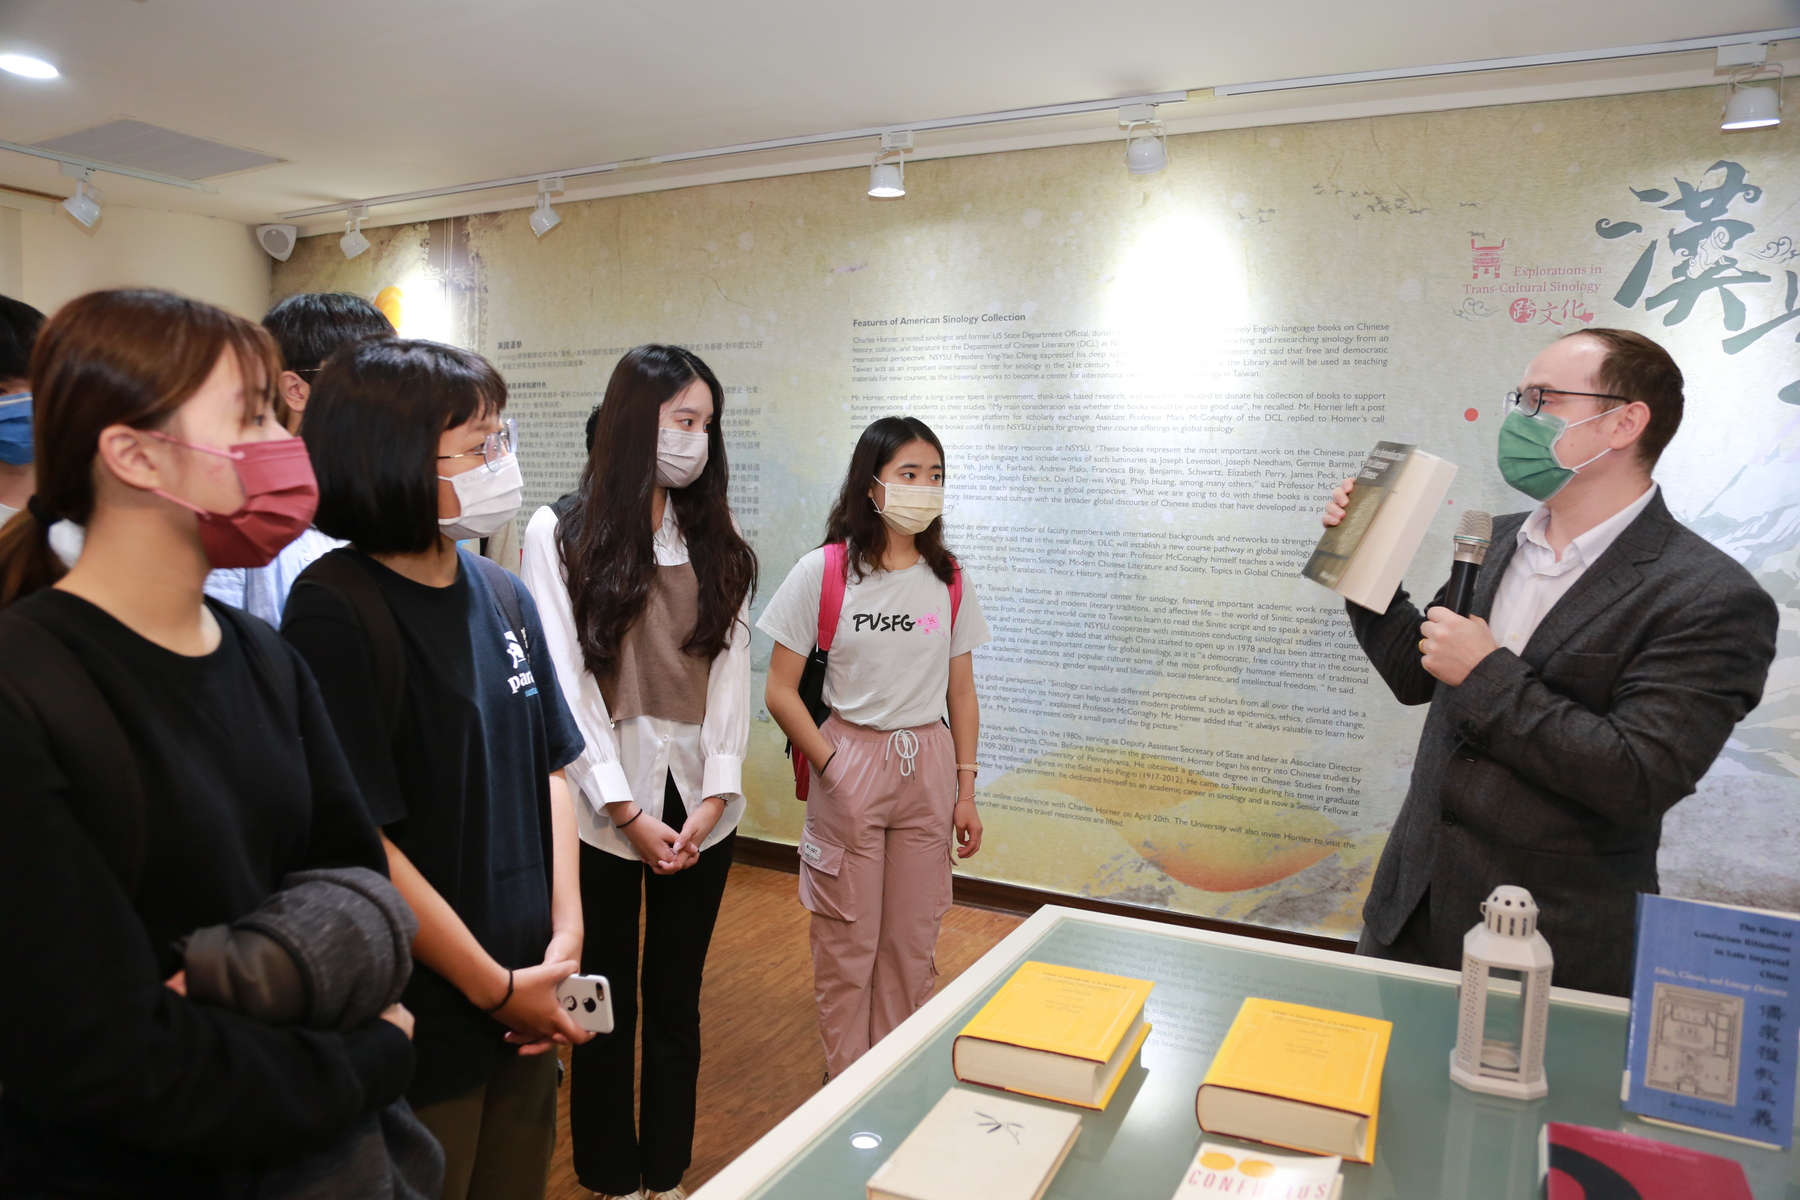 Book exhibition on Global Sinology available to visit by April 30